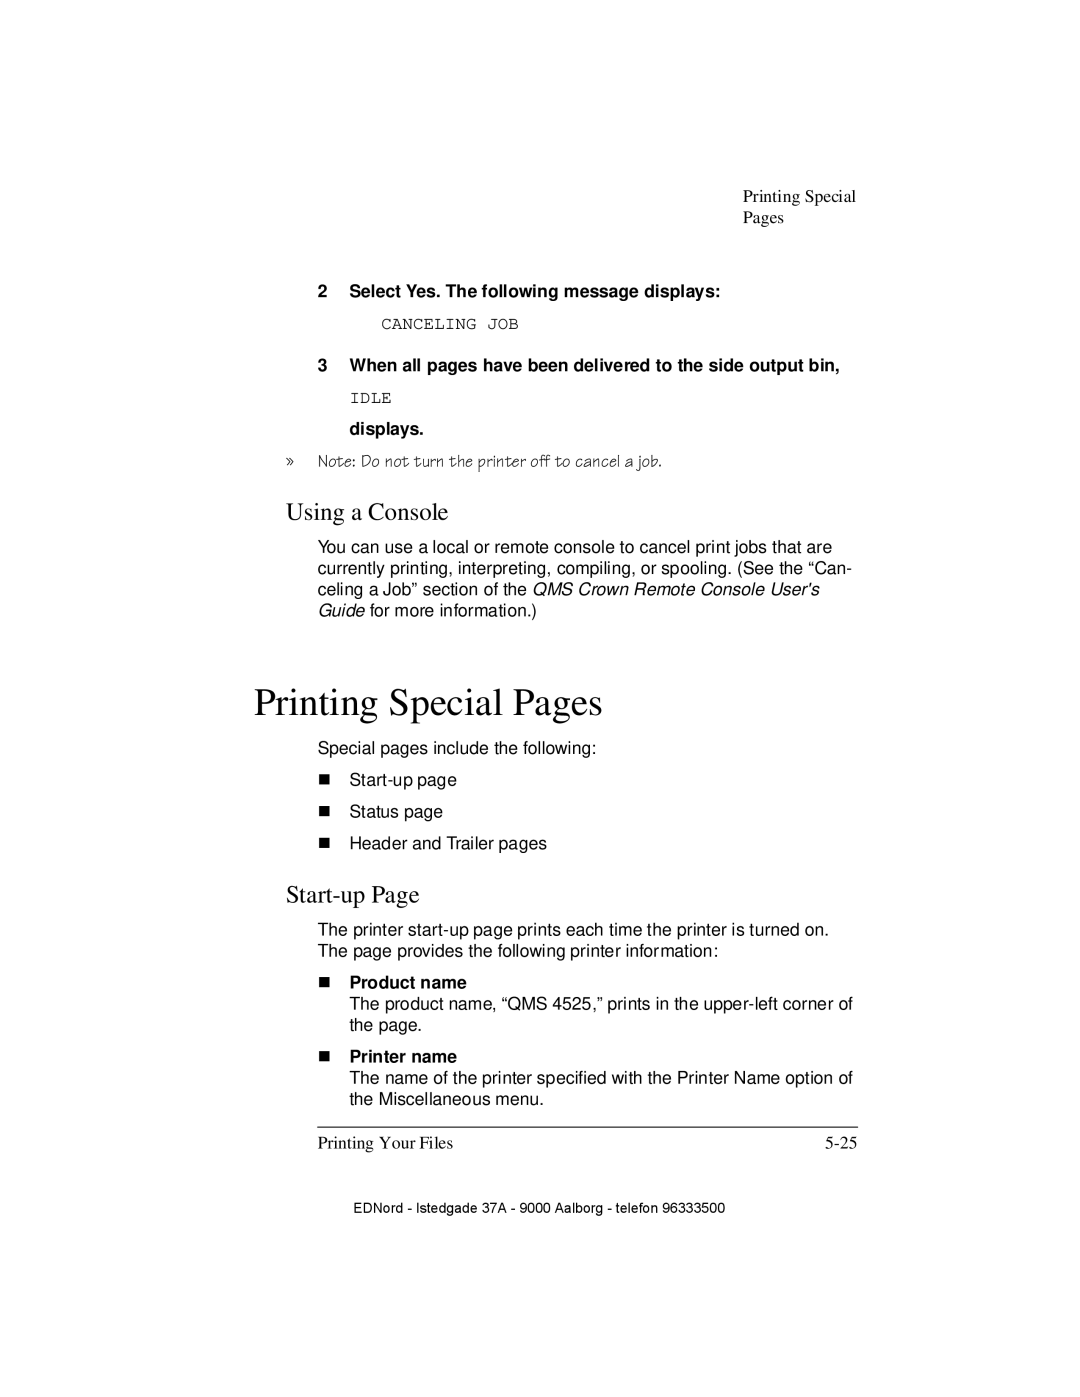 IBM QMS 4525 manual Printing Special Pages, Using a Console, Start-up Page 